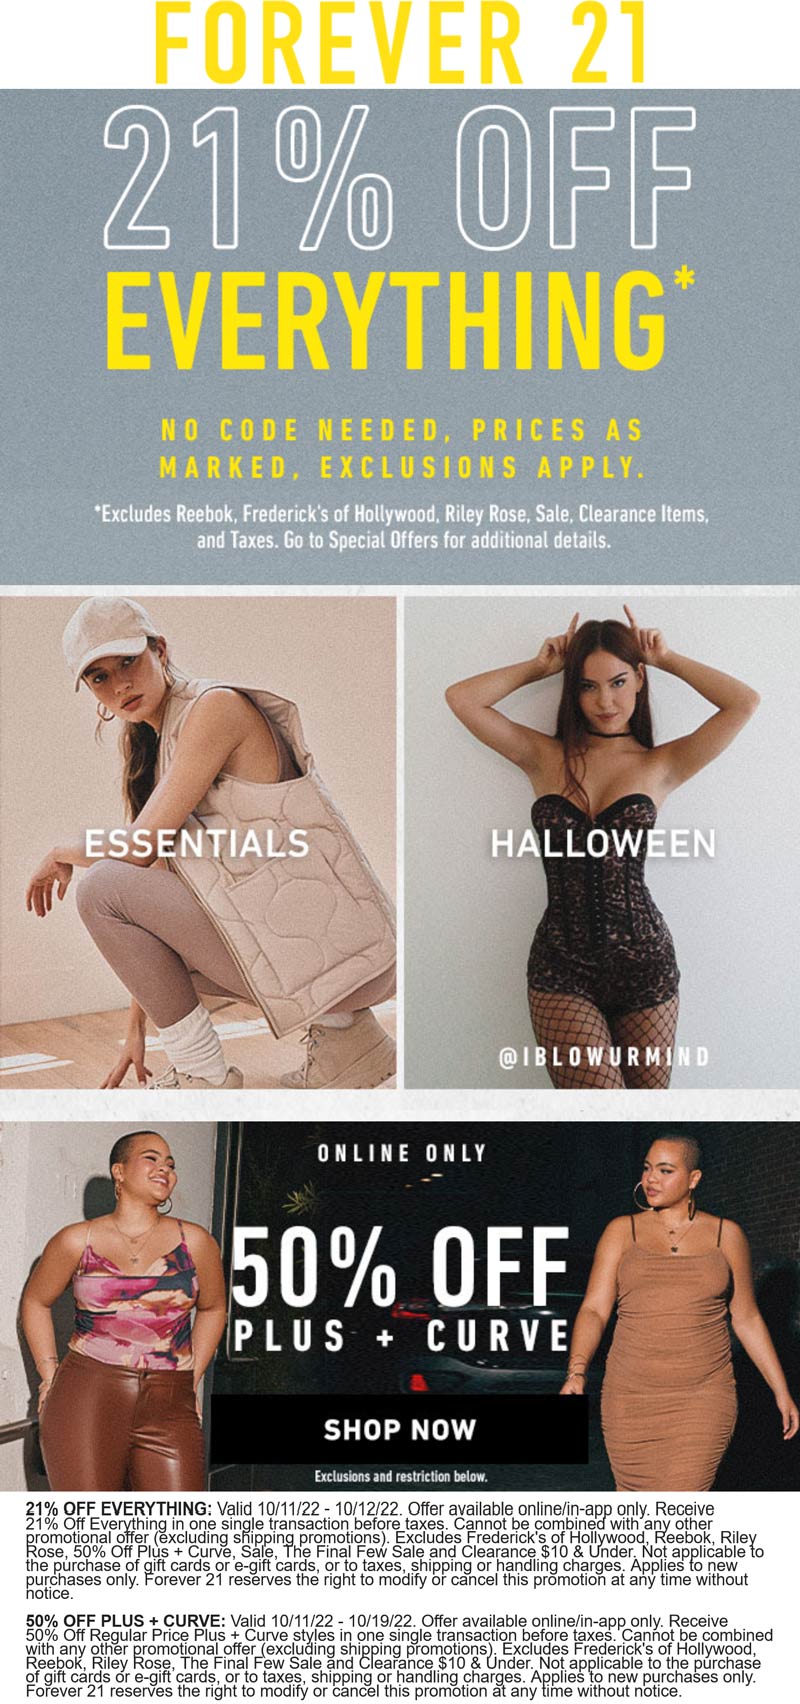 Forever 21 stores Coupon  21% off everything online today at Forever 21 #forever21 